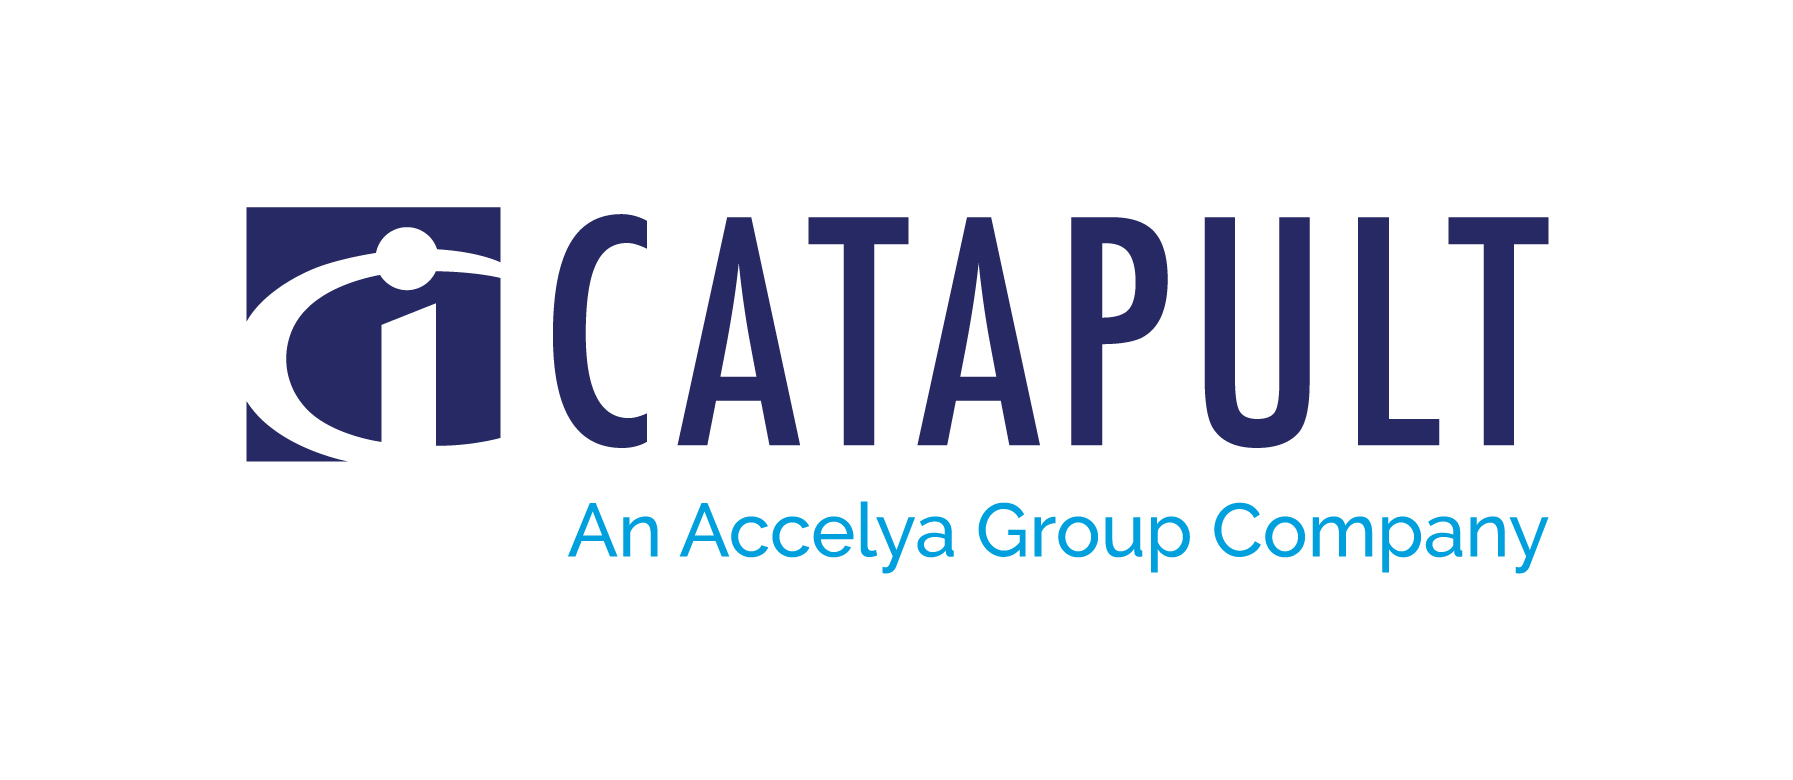 Catapult Launches Gr